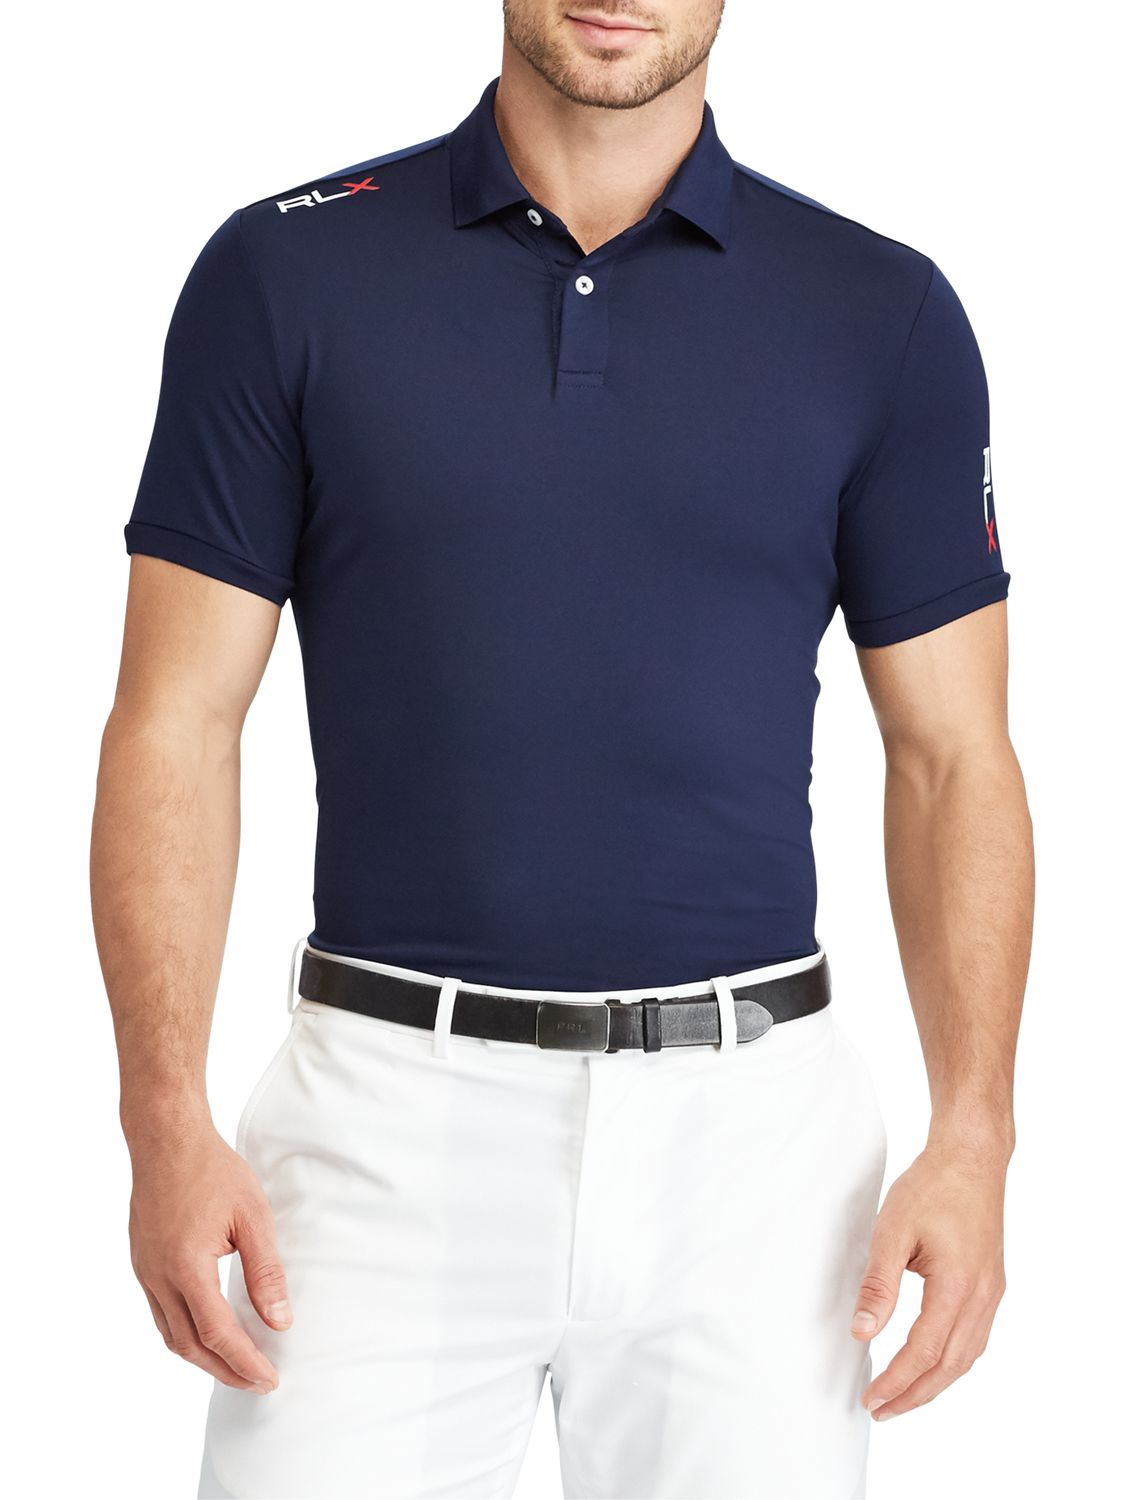 Polo Golf by Ralph Lauren Custom Fit Performance Polo Shirt, French Navy